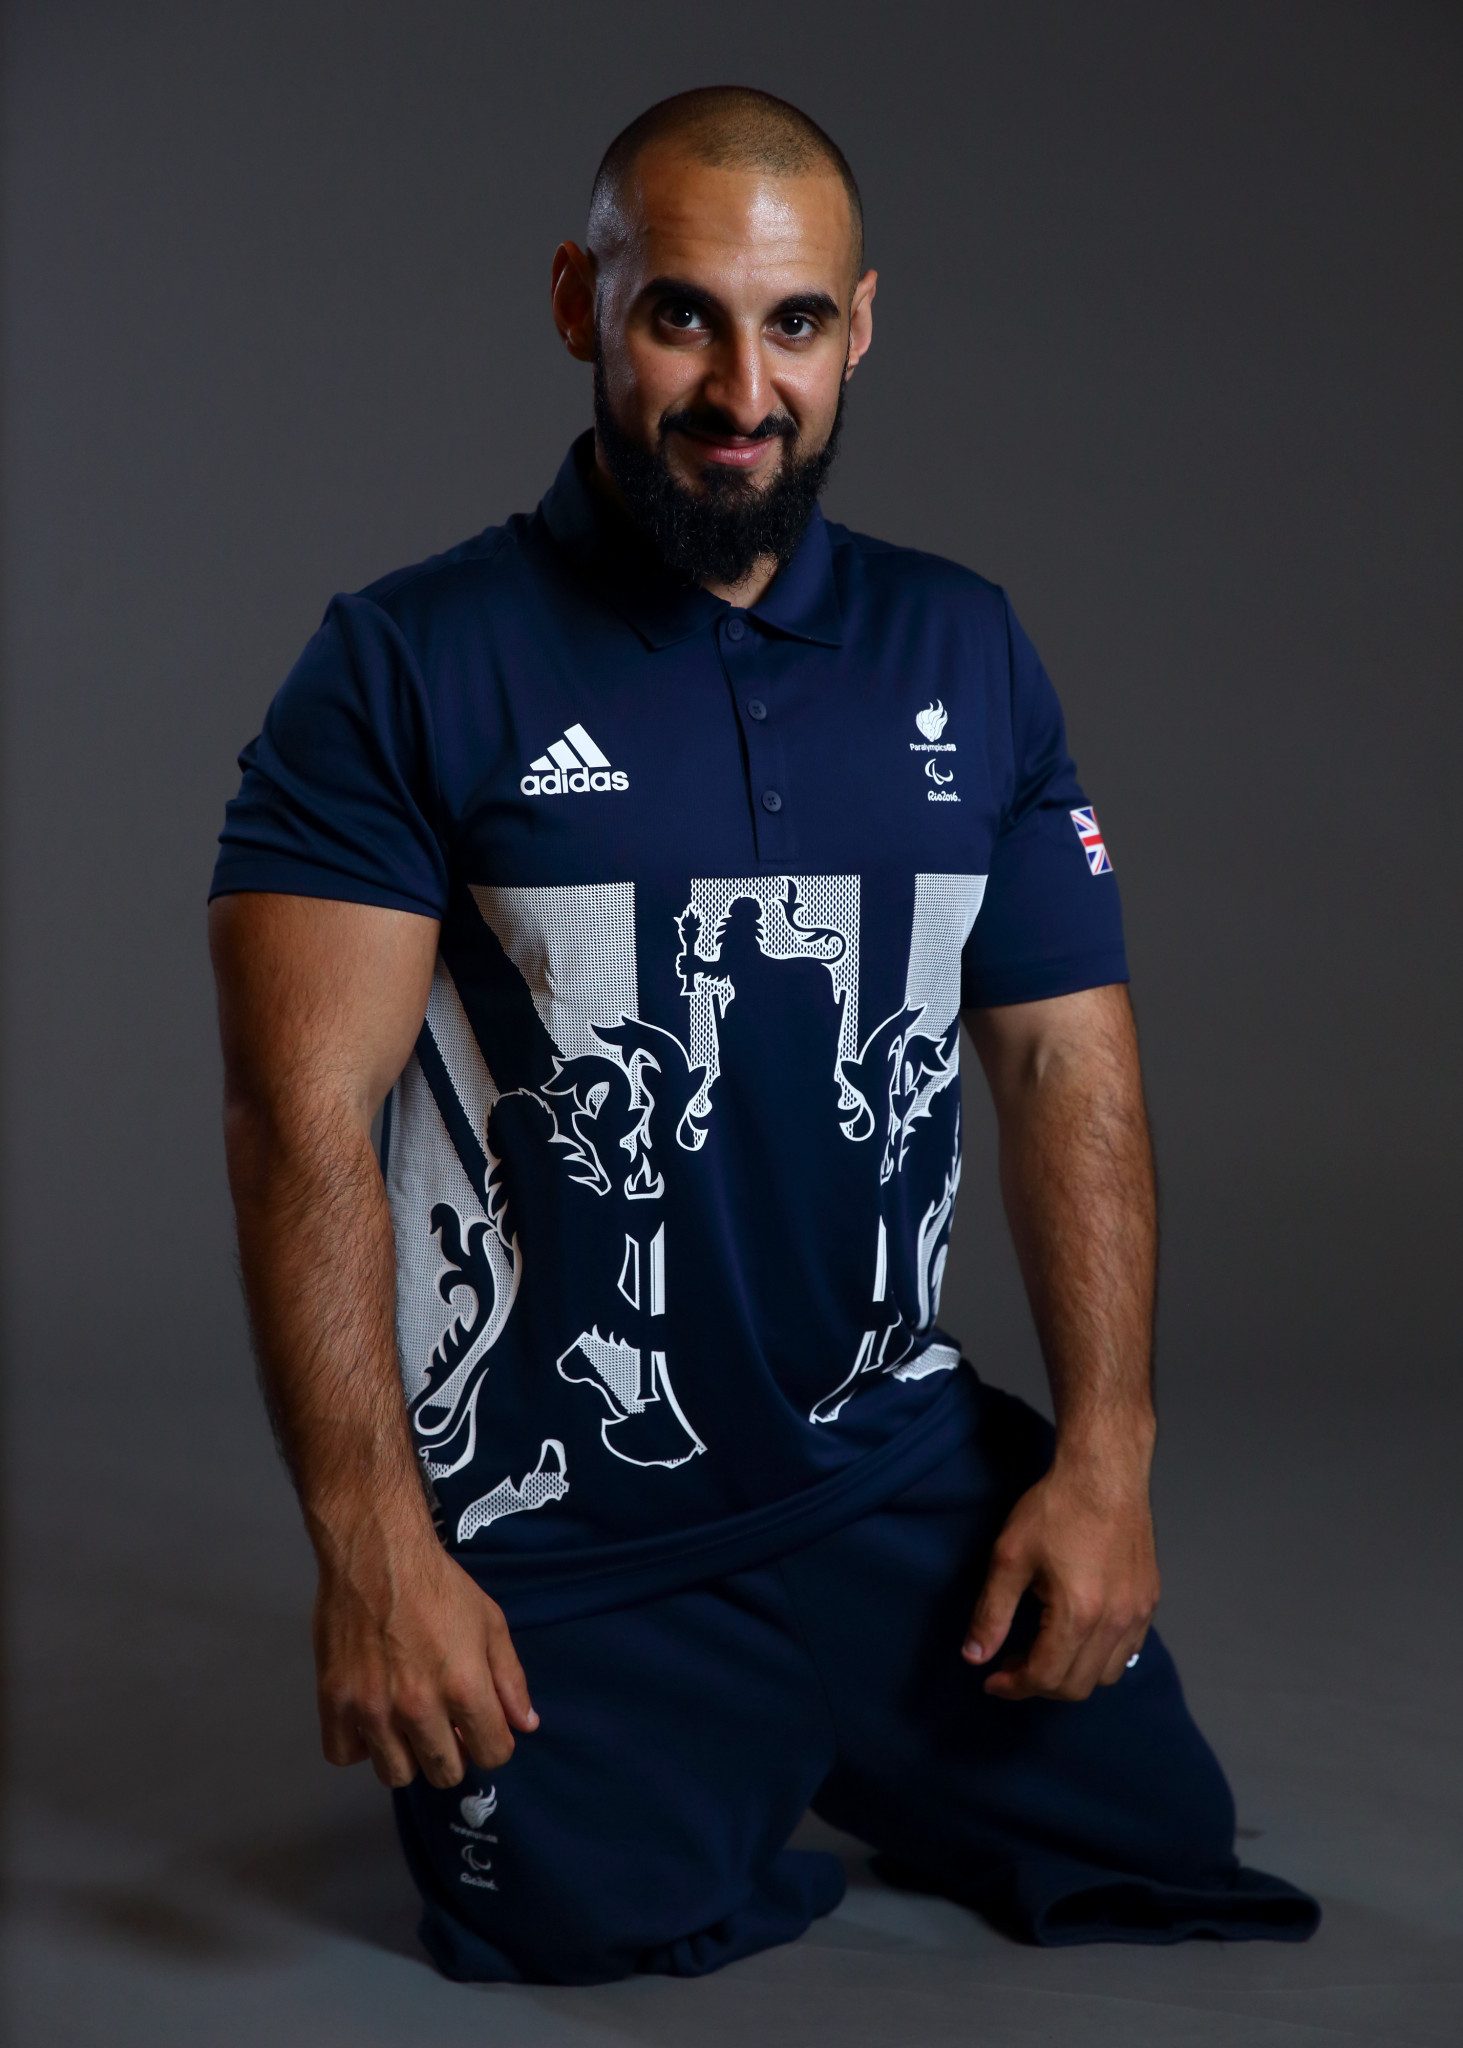 Great Britain’s Ali Jawad is joined by Nigeria’s Lucy Ejike and Egypt’s Sherif Osman as the three powerlifting candidates for in line to become the World Para Powerlifting Athlete Representative ©Getty Images